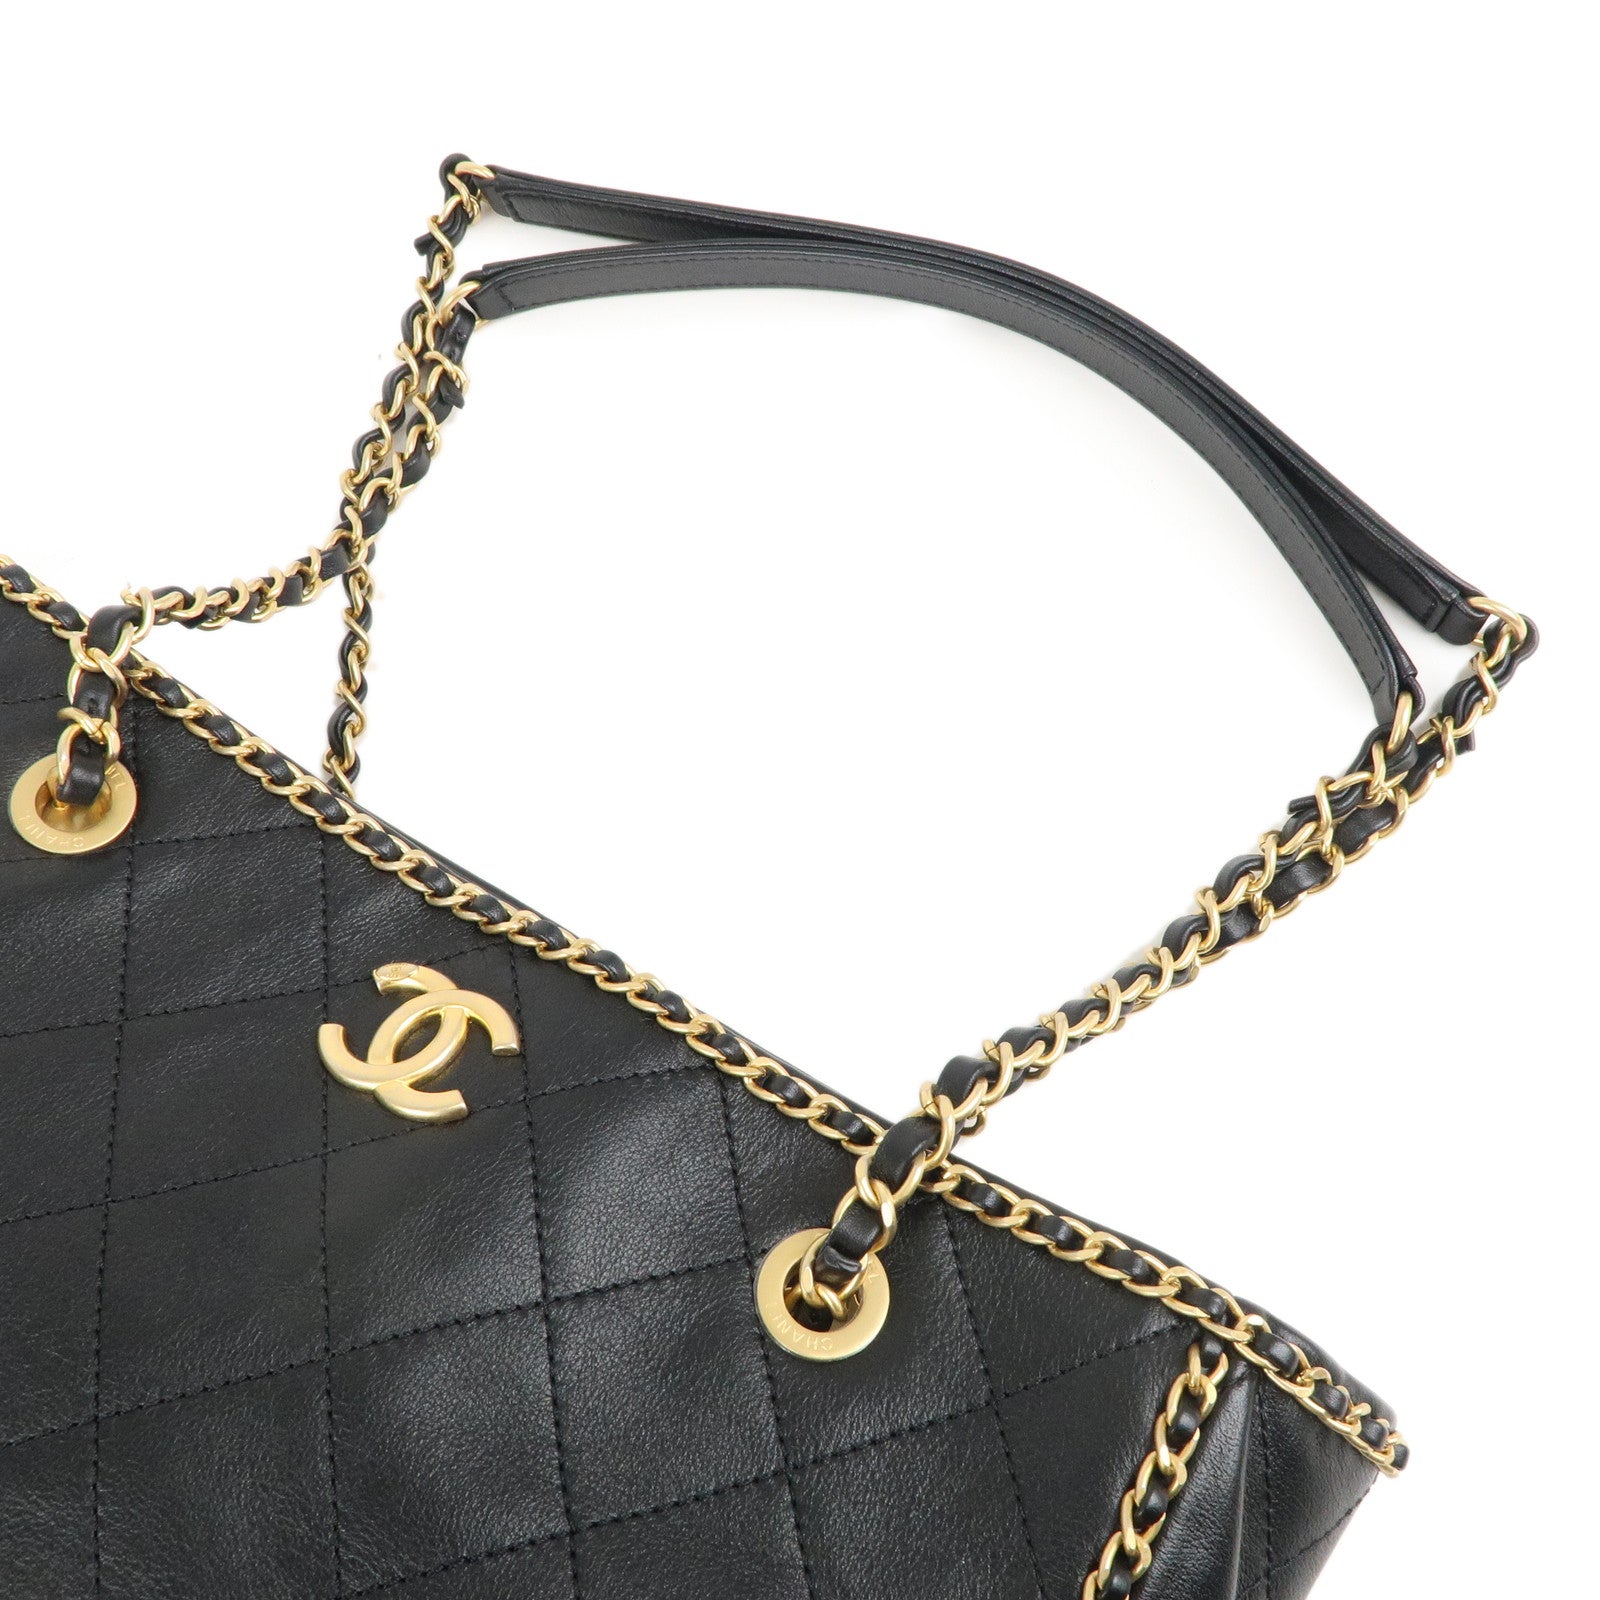 CHANEL, Bags, Chanel Classic Tote Bag Gold Chain Hardly Worn